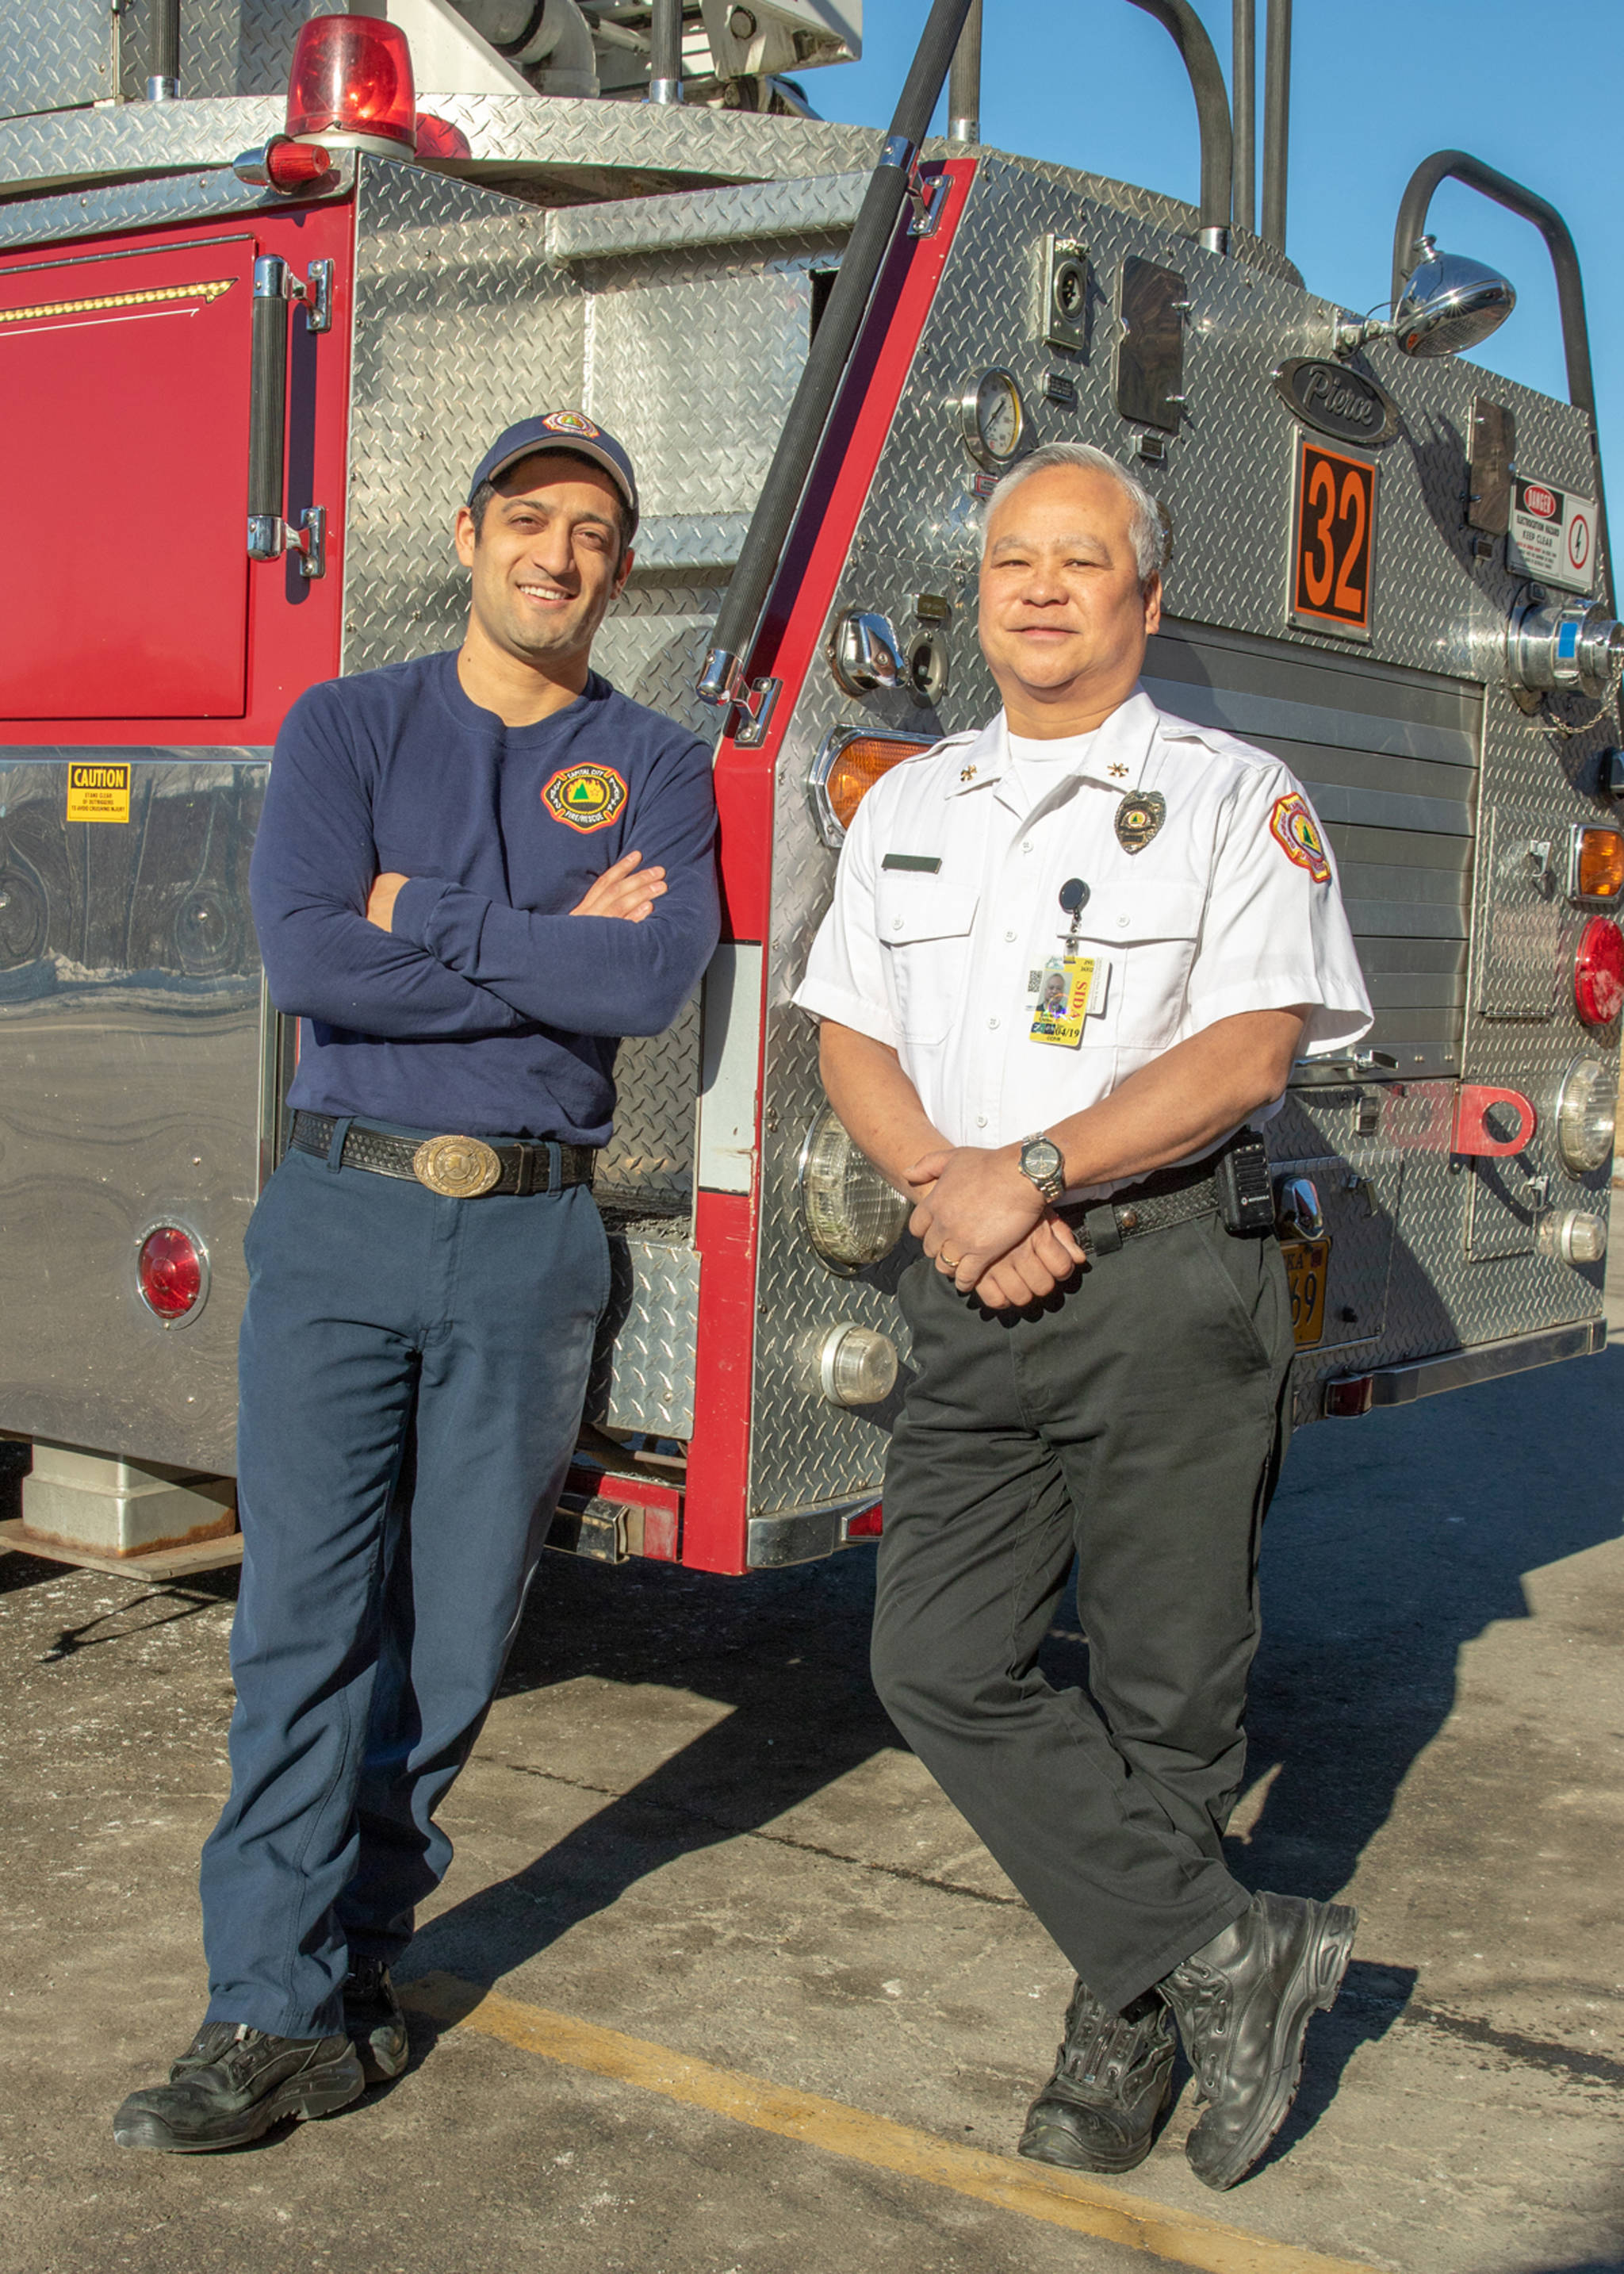 March 24, 2019: There’s just something about a guy in a uniform, and Cheyenne Sanchez and Ed Quinto both wear theirs well. Cheyenne is sporting a Capital City Fire and Rescue’s “Class C” or normal daily duty uniform — a navy T-shirt and navy pants. Ed is wearing the “Class B” uniform — a white shirt with his Assistant Fire Chief Badge and black pants. A white shirt signifies a chief officer or fire marshal. Zippered boots are a must so they can quickly get into gear to respond to a call. Thanks for your service guys — you both look great!